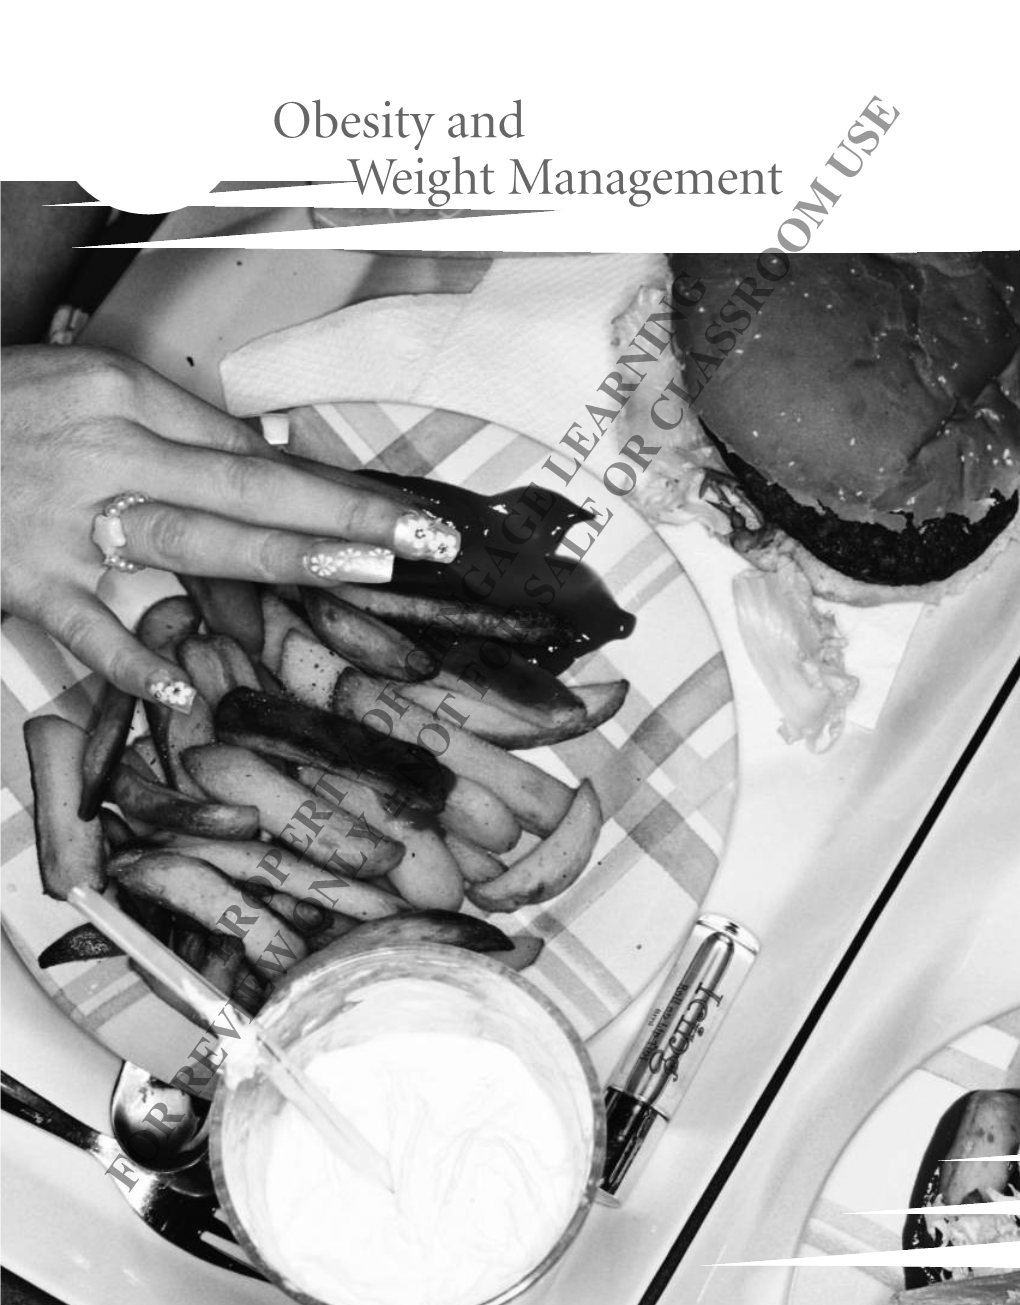 Obesity and Weight Management